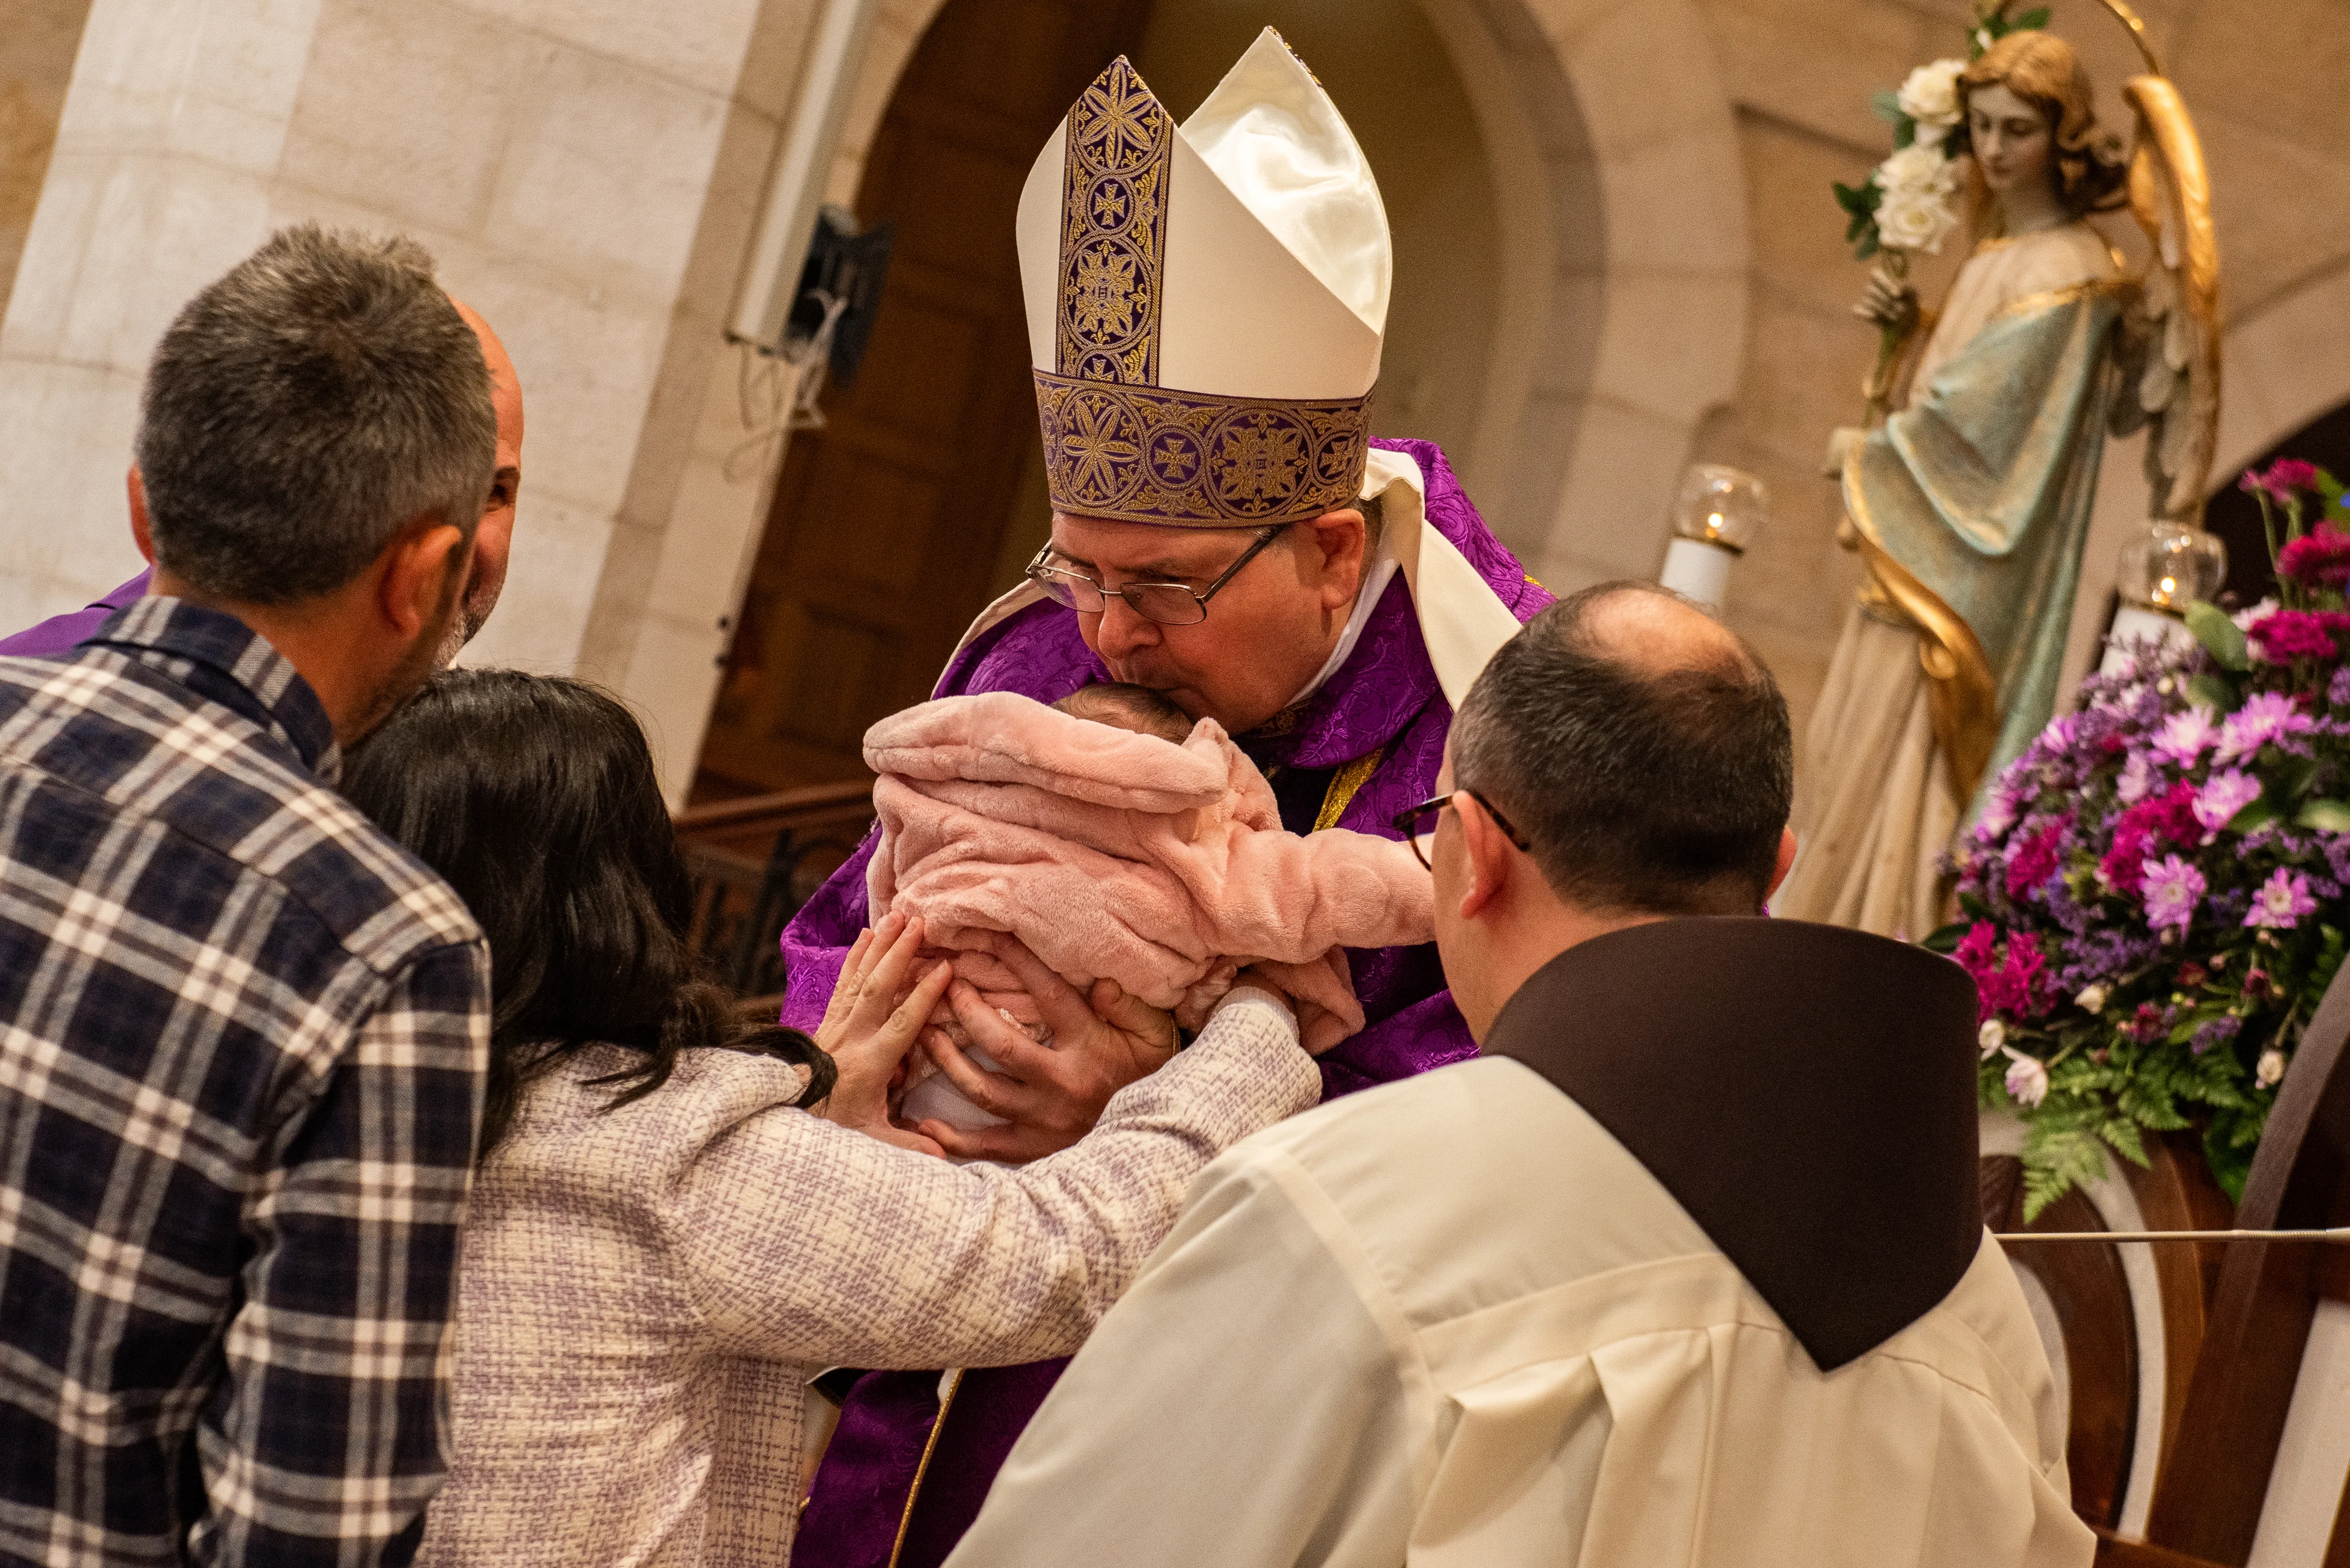 The custos of the Holy Land, Father Francis Patton, during the offertory of the solemn Mass of the first Sunday of Advent in Bethlehem receives a baby girl making her entrance into the Church for the first time, approximately 40 days after her birth, a tradition still observed in this land. Dec. 3, 2023. Credit: Marinella Bandini